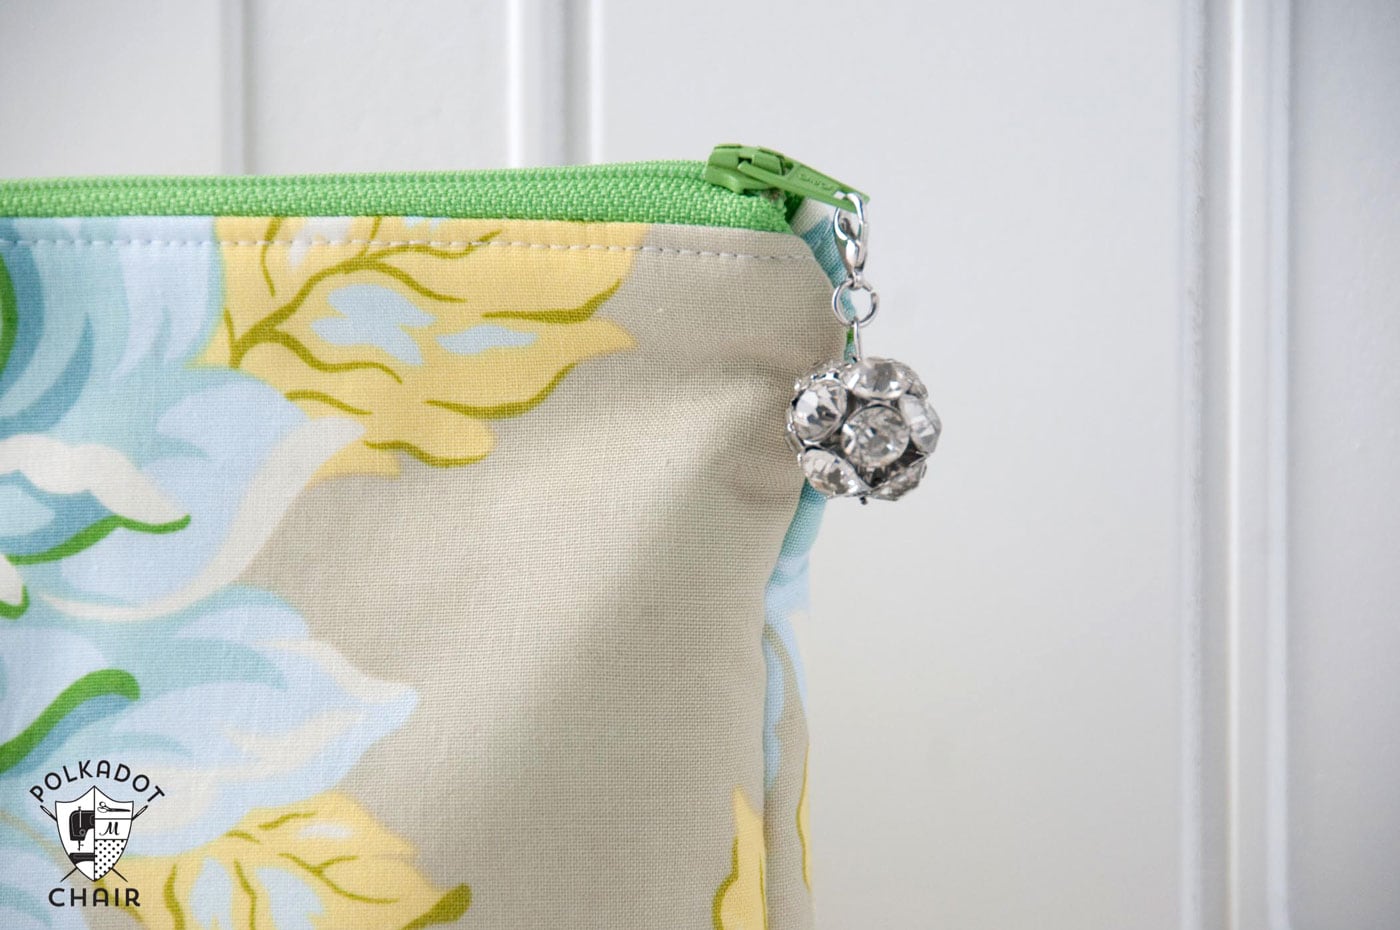 Free Sewing Pattern for an embellished stand up zippered pouch - fun little sewing tutorial